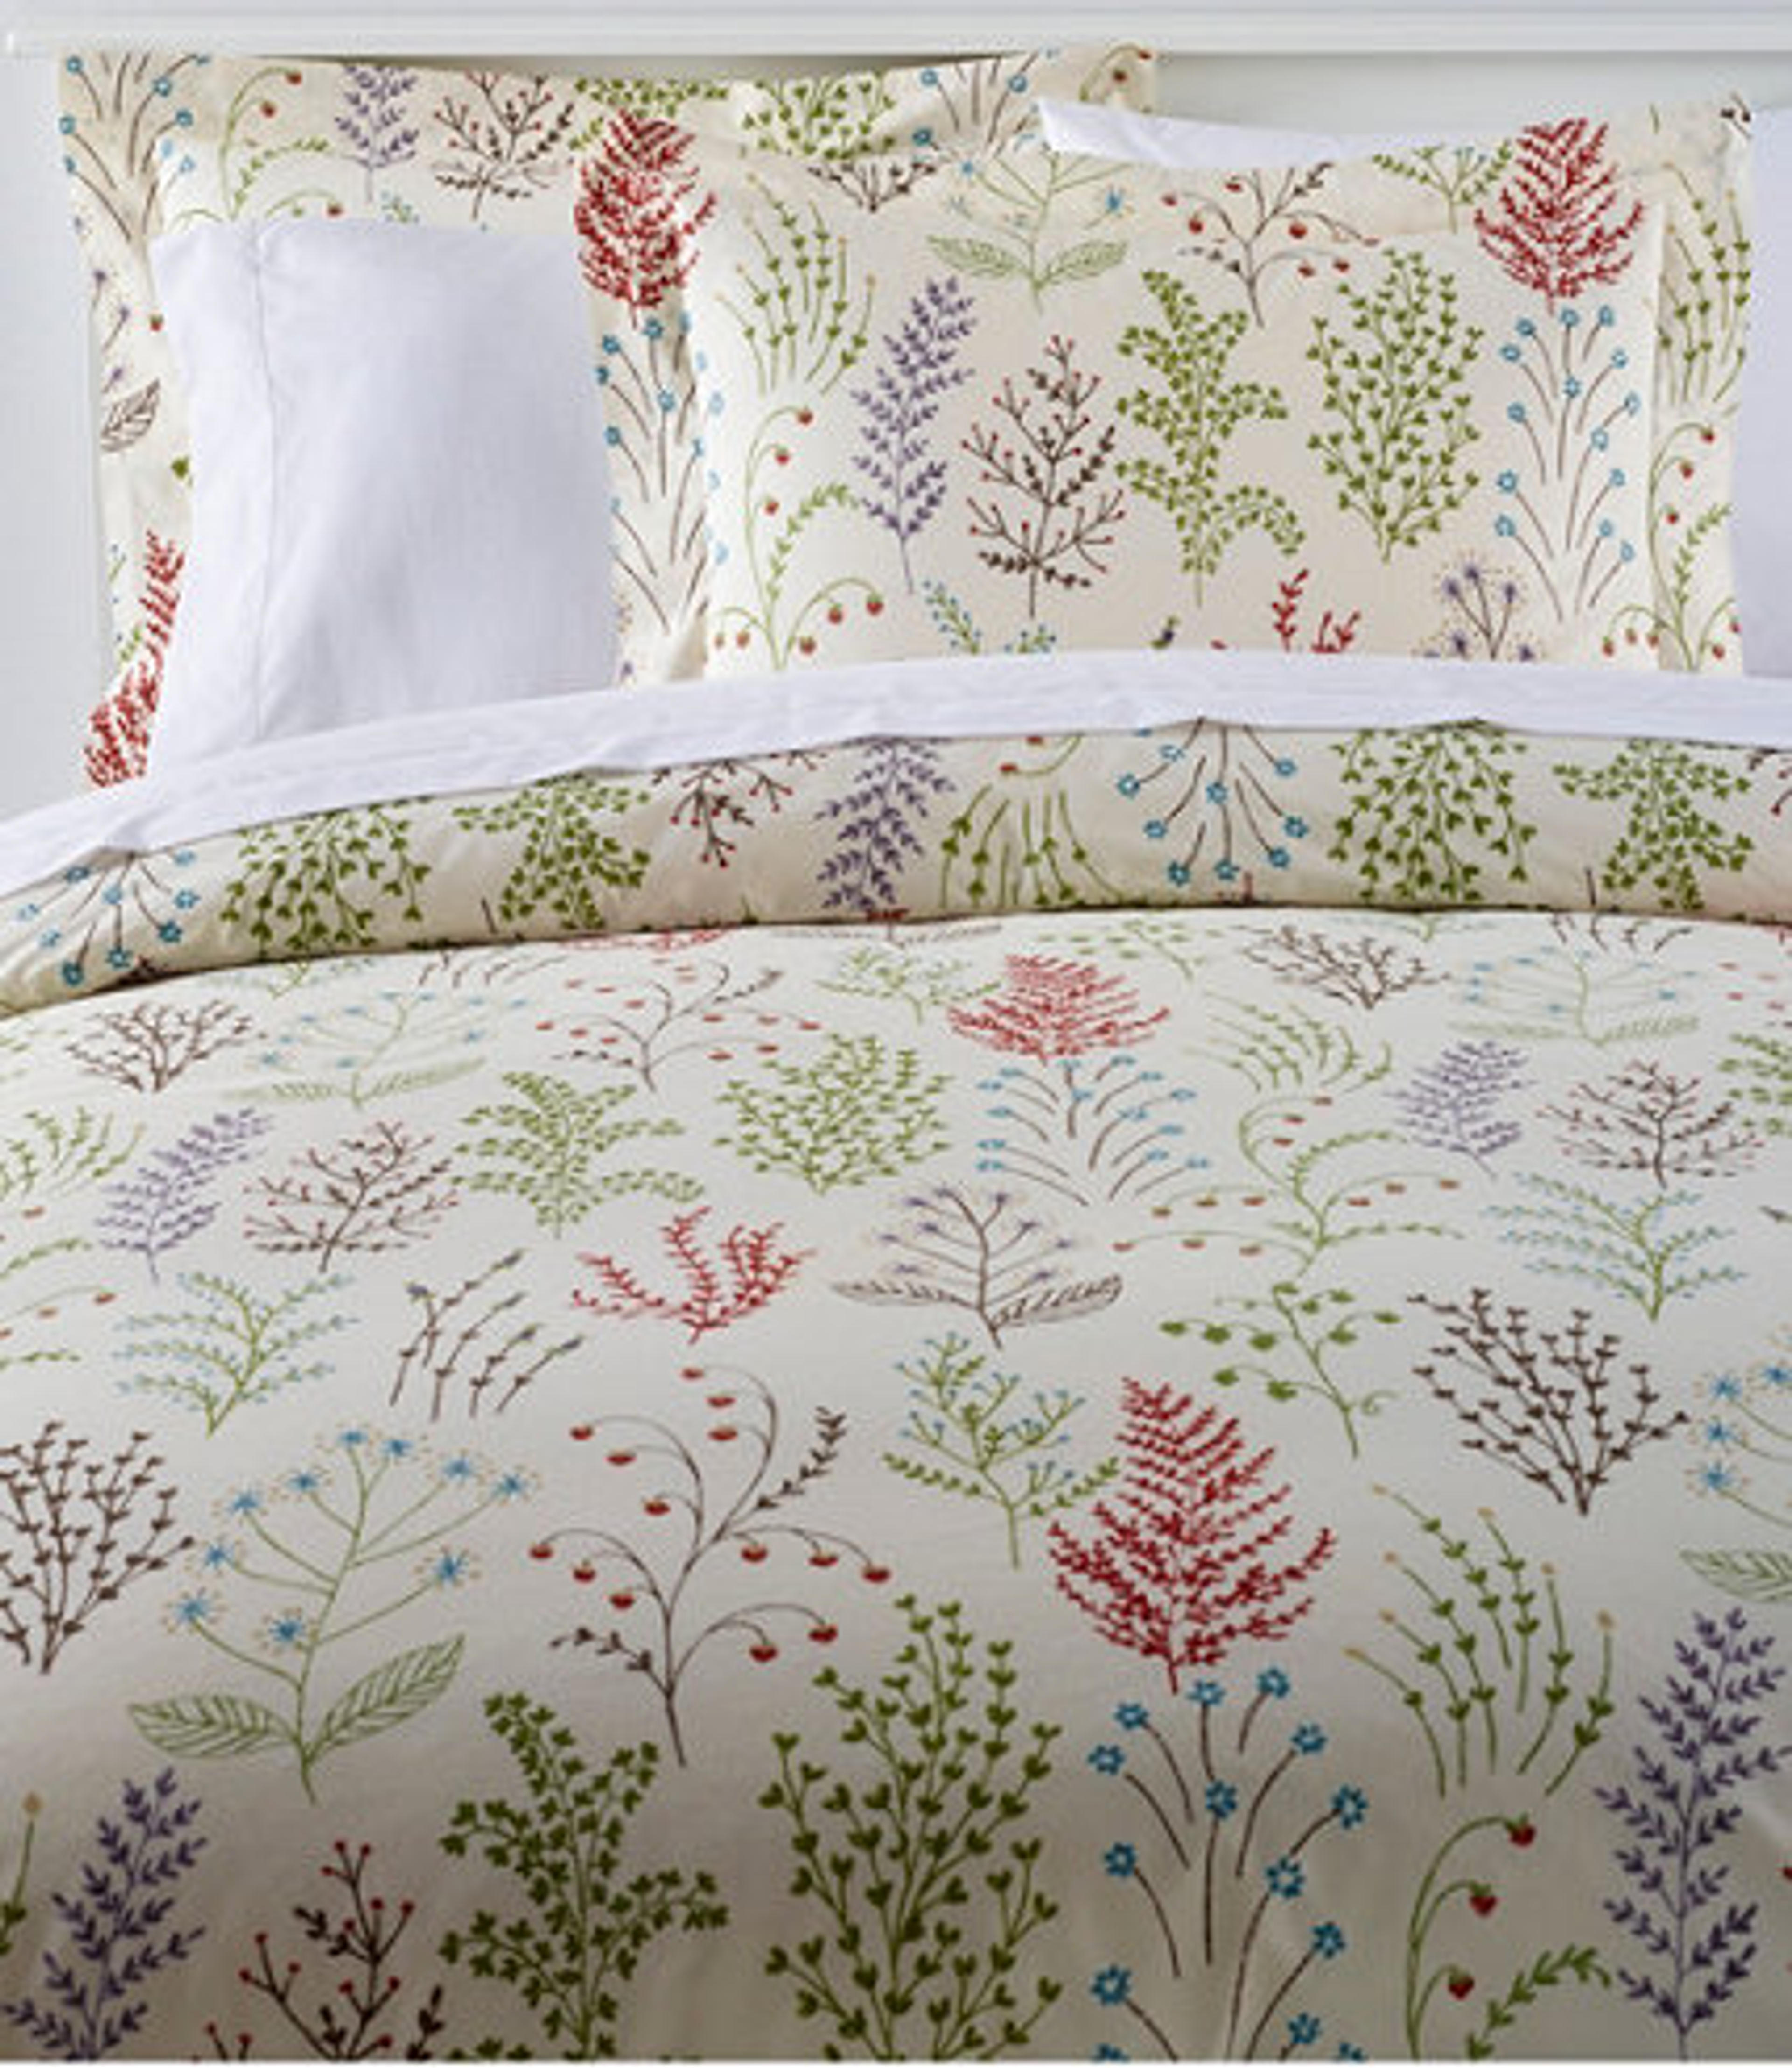 Botanical Floral Percale Comforter Cover Collection | Comforter Covers at L.L.Bean